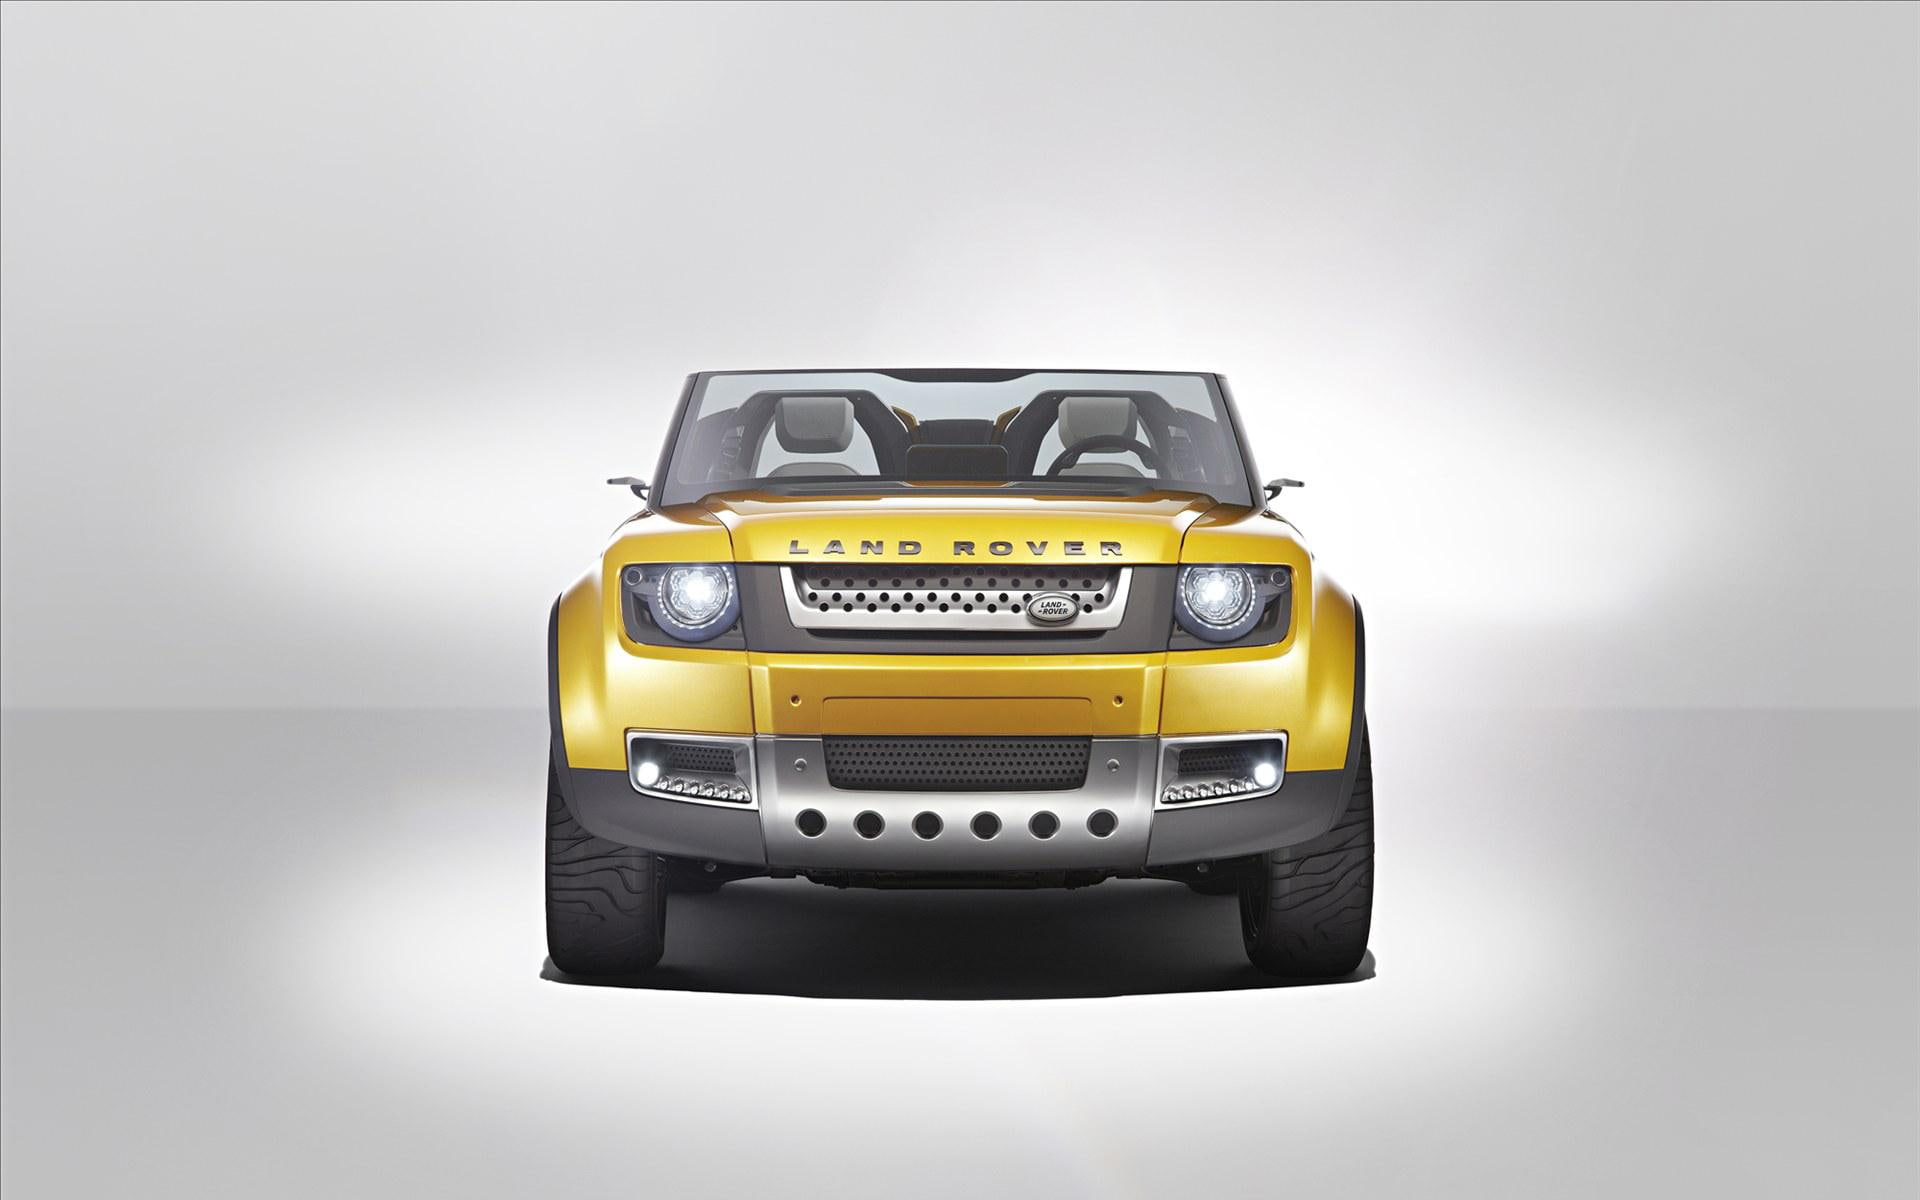 Land Rover Defender Sport Concept 2011, yellow and grey land rover